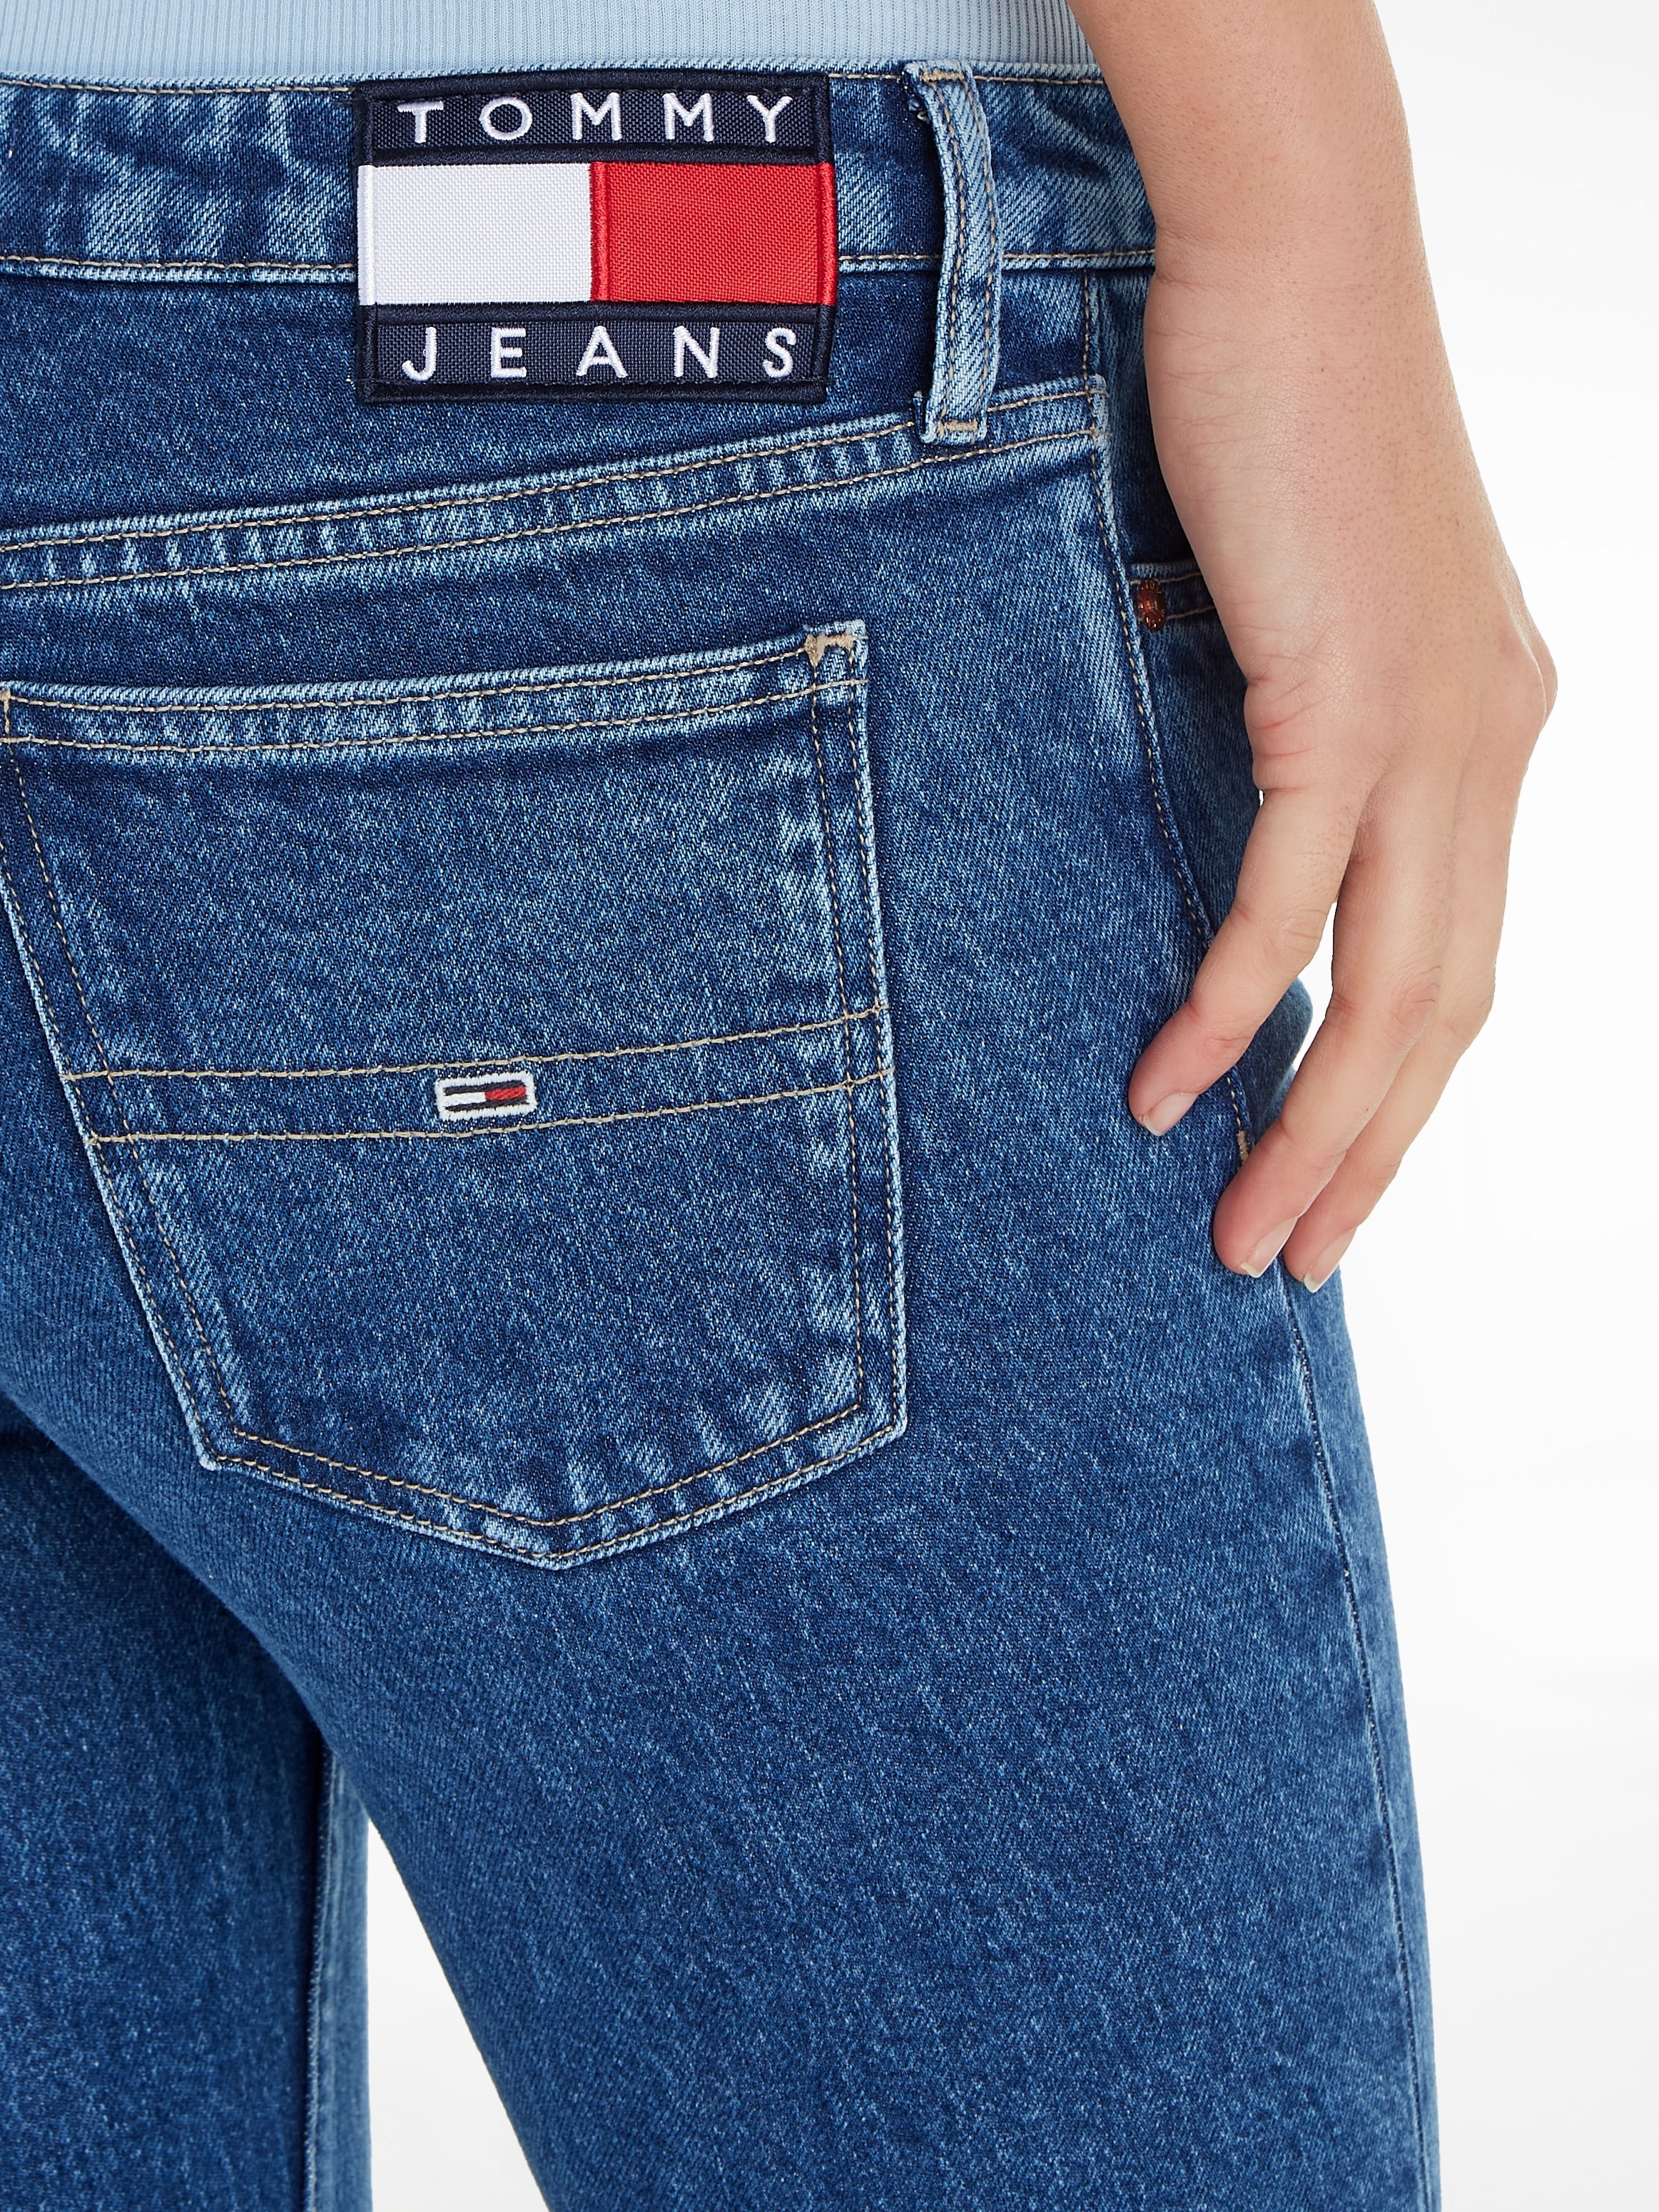 Jeans Tommy Schlagjeans, bei Logobadge mit Jeans Tommy ♕